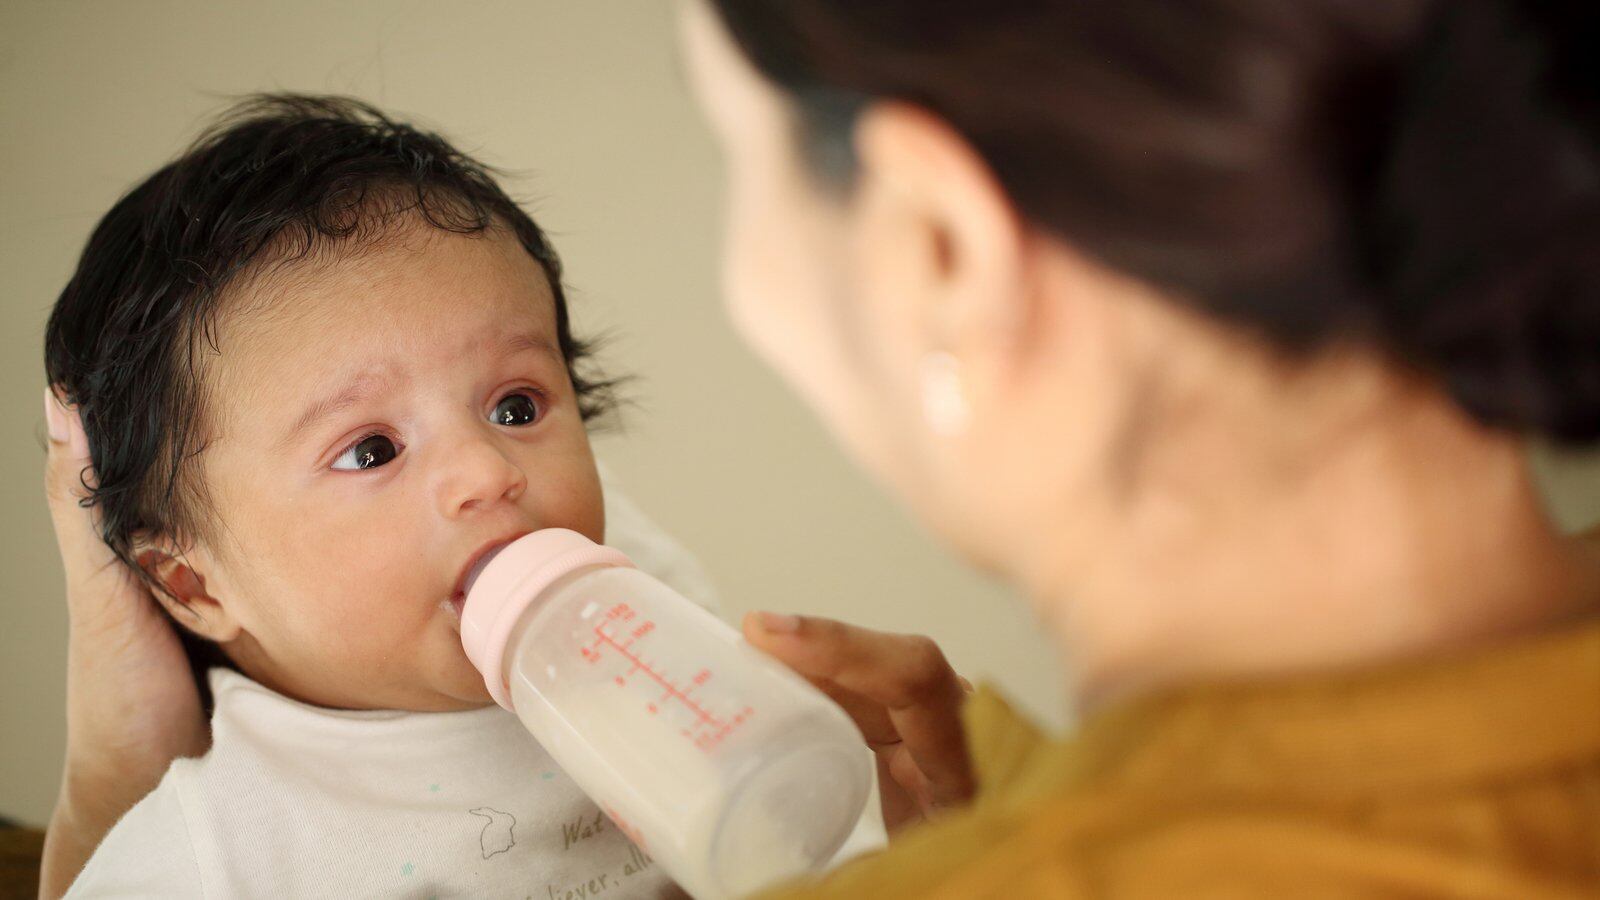 In mid-March, some Chicago stores were sold out of infant formula and distilled water.